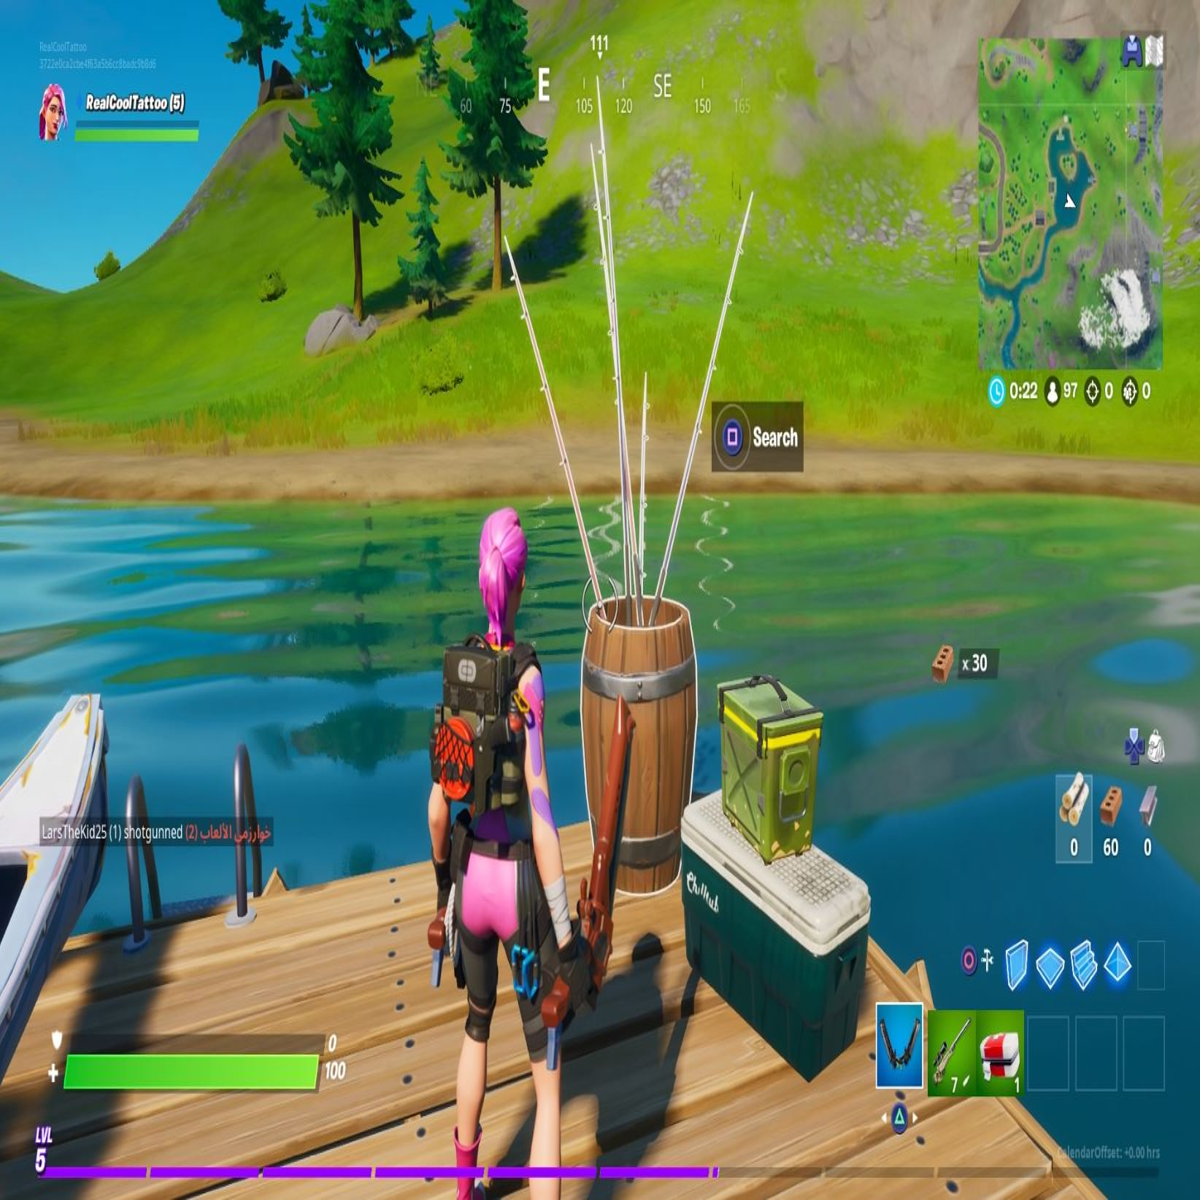 https://assetsio.gnwcdn.com/fortnite-find-fishing-rods.jpg?width=1200&height=1200&fit=crop&quality=100&format=png&enable=upscale&auto=webp